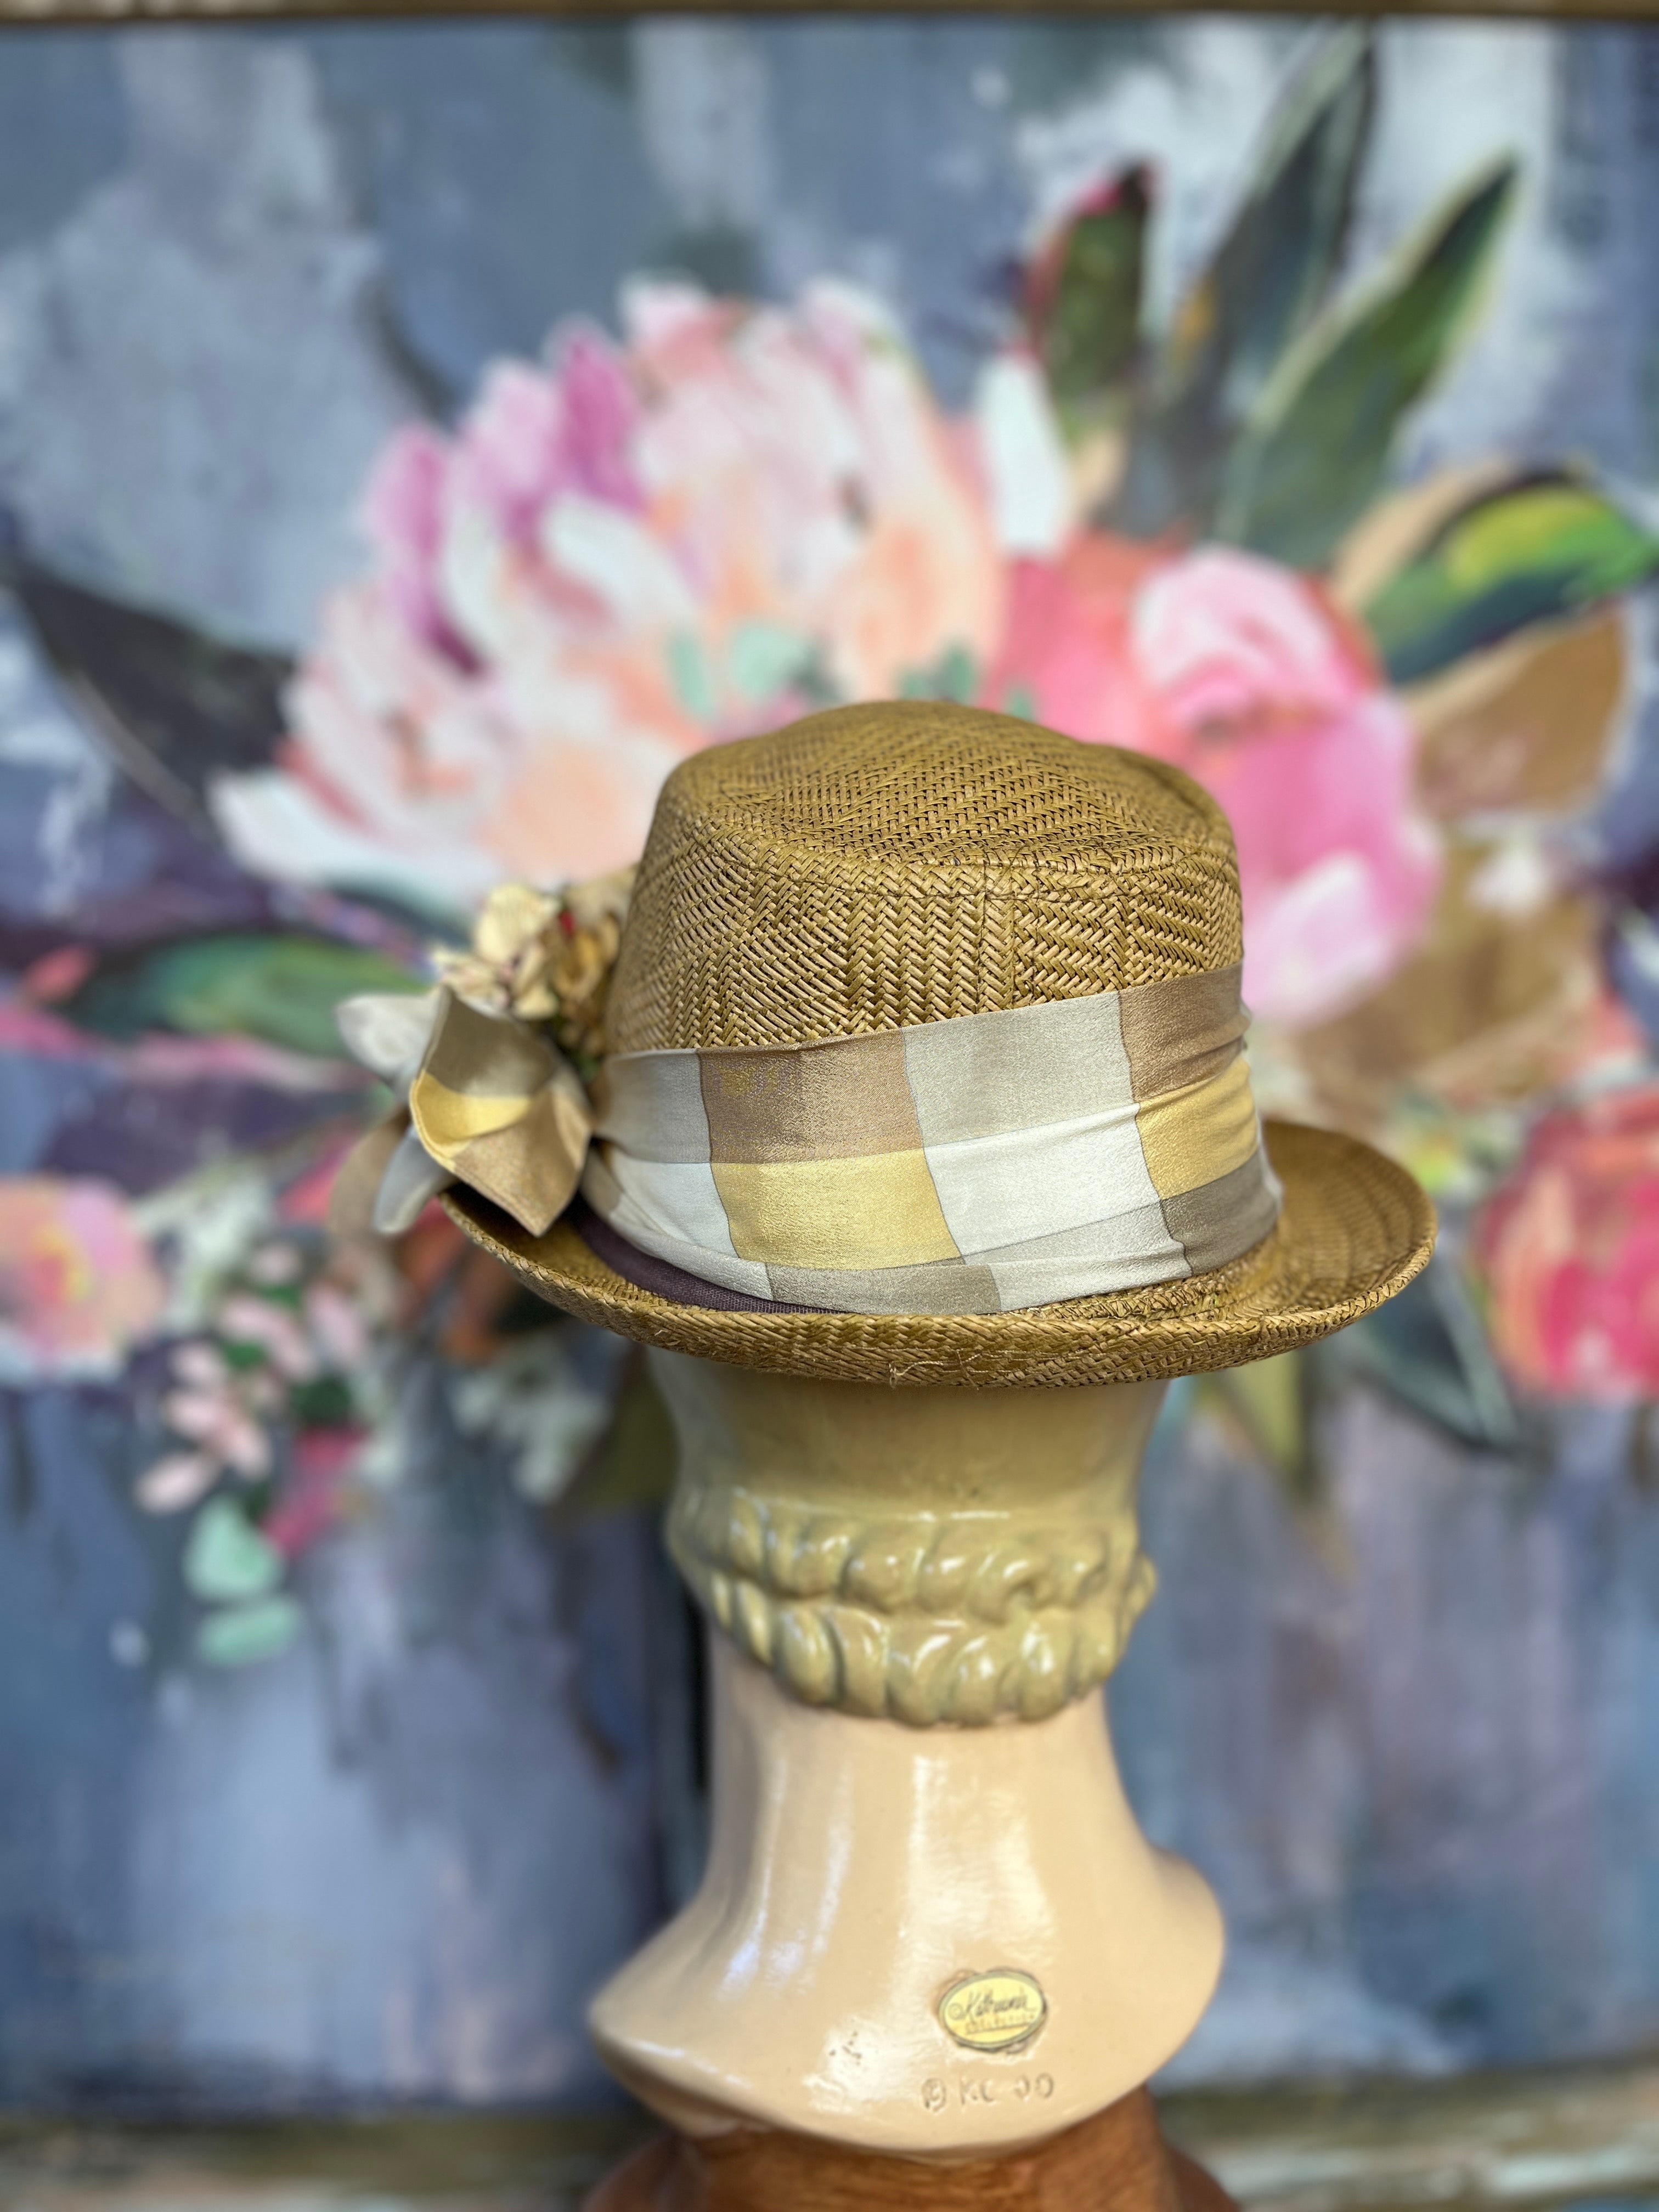 “Strictly Business” Summer Straw Fedora Hat